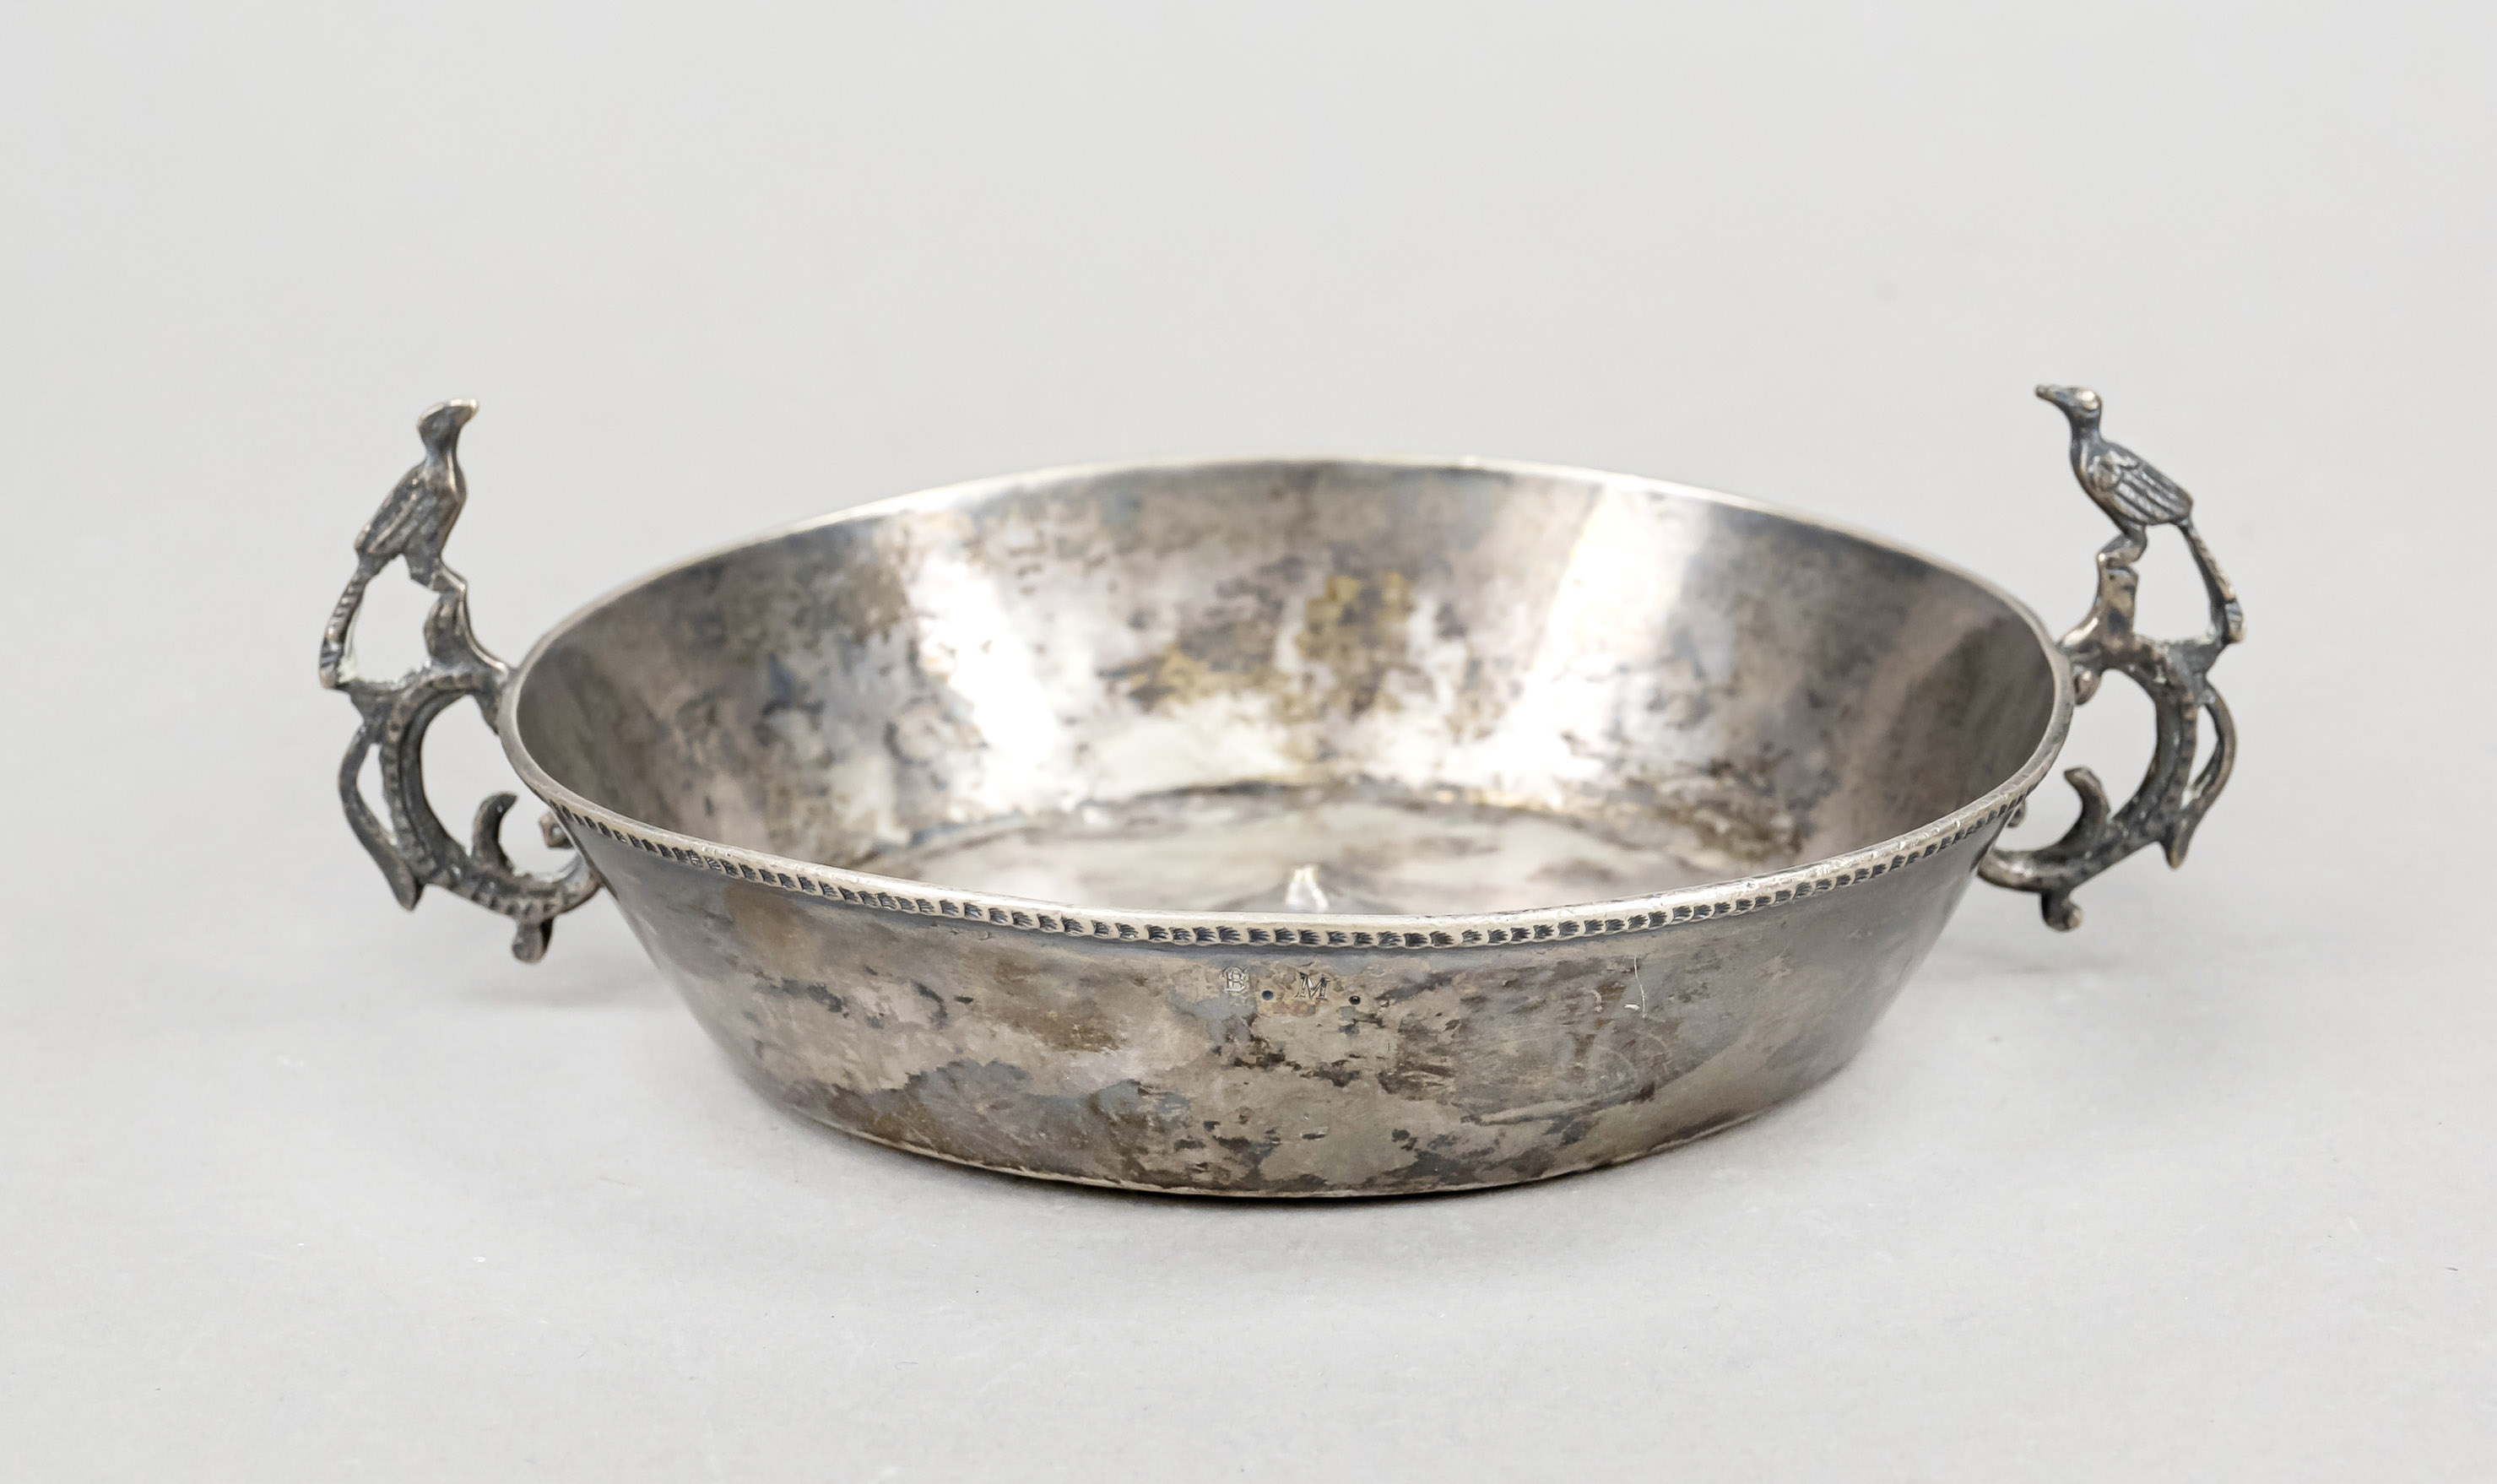 A round wine tasting bowl, circa 1900, silver tested, marked B. M., round base, conical wall,